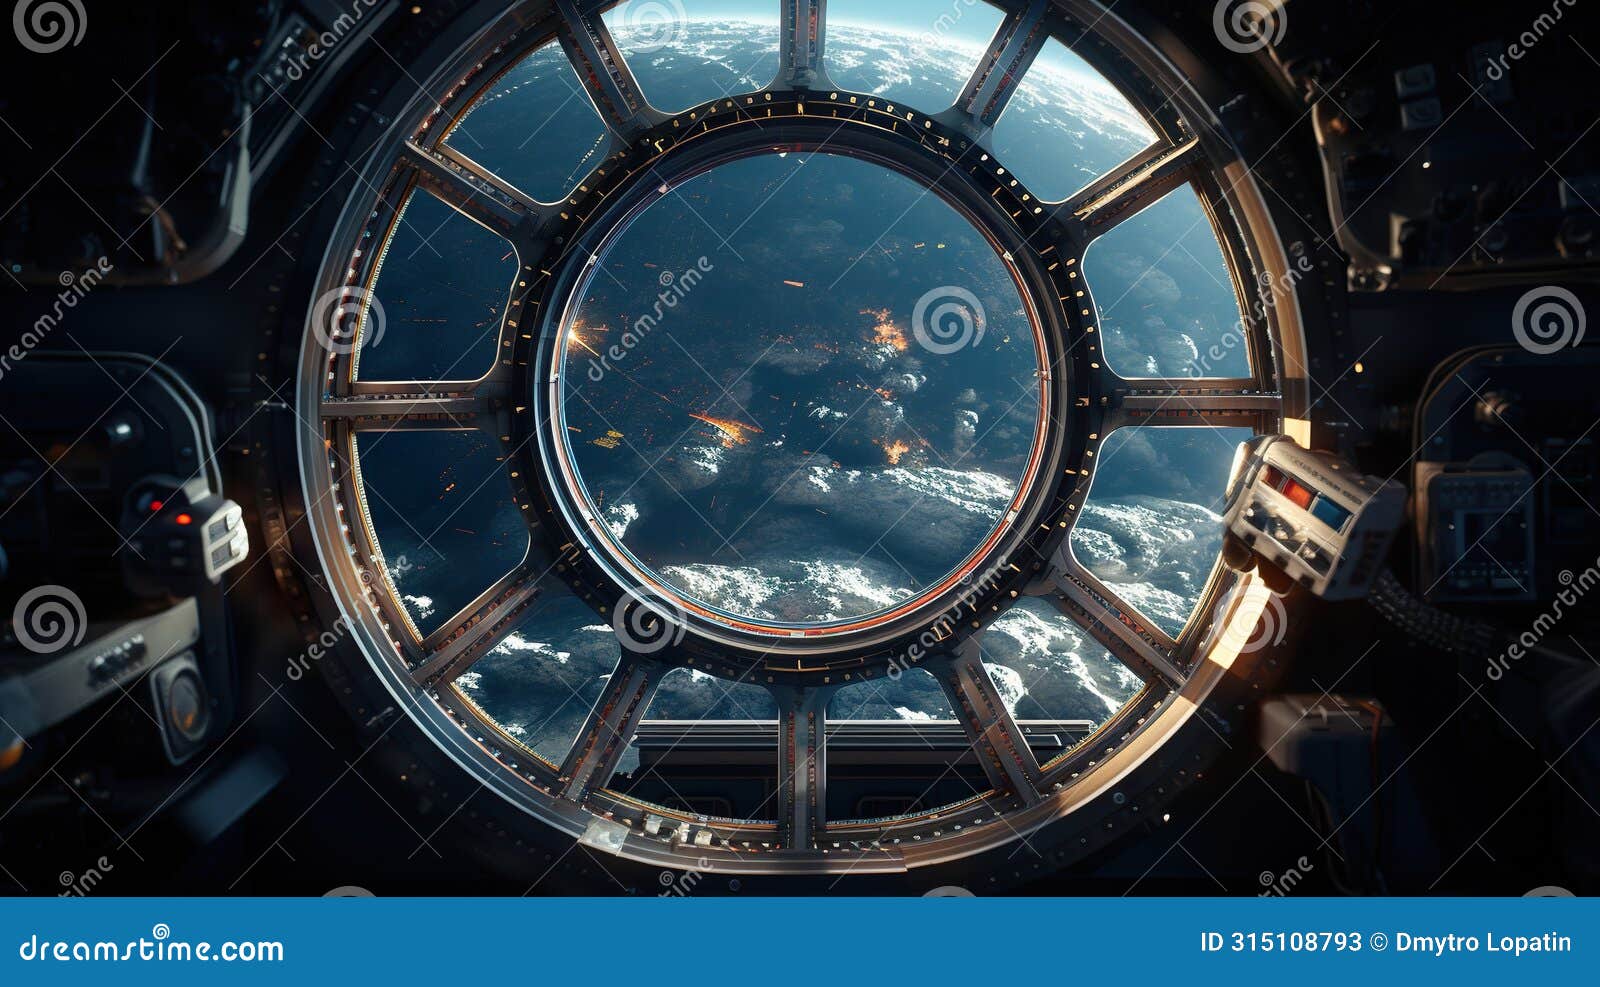 spaceship round window with sunrise over planet view, space station porthole illuminator with planetary sunset view